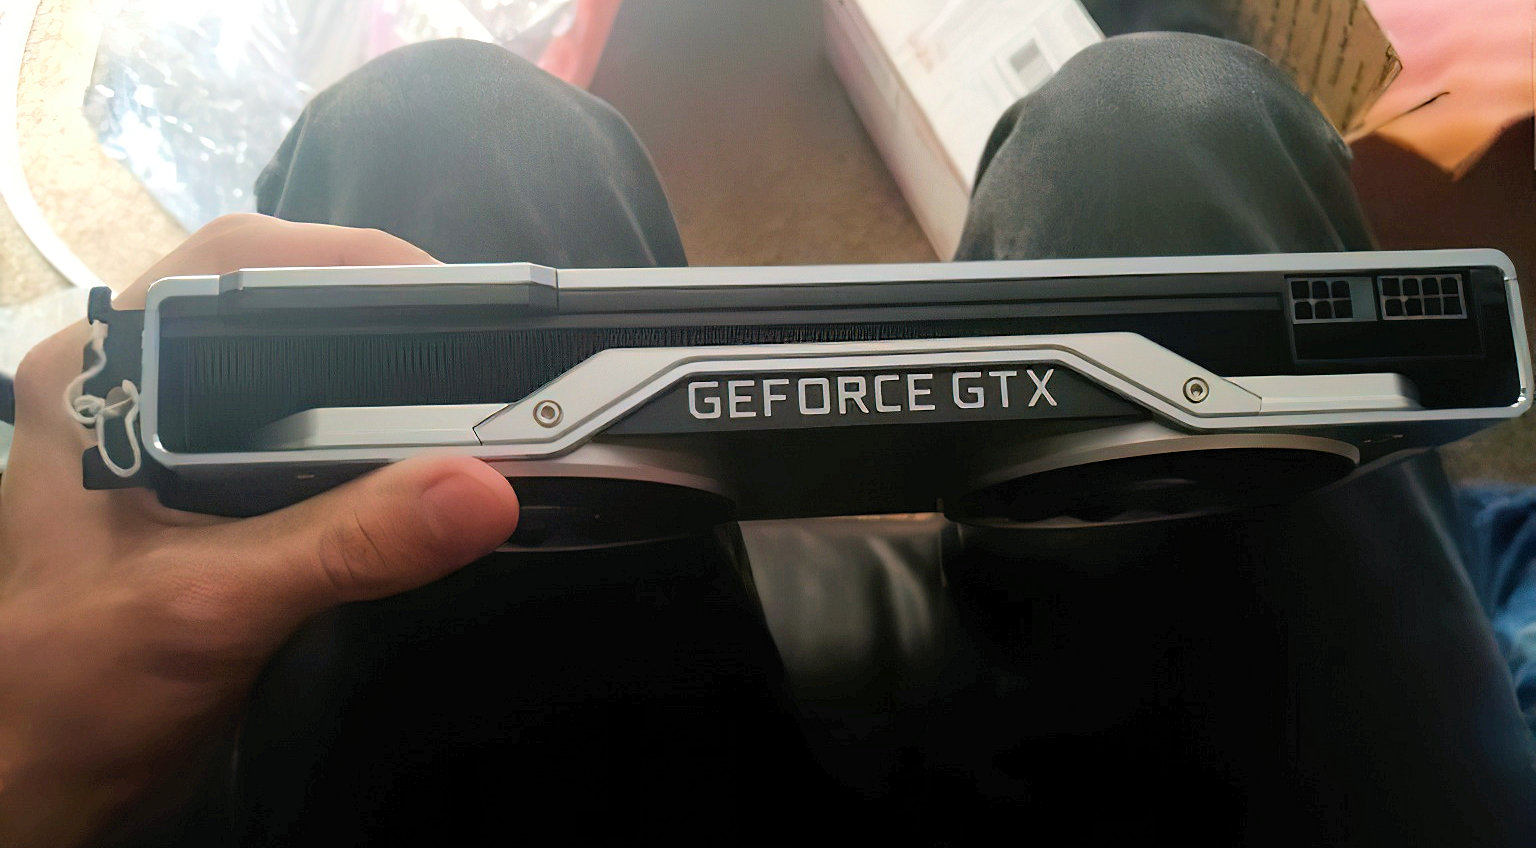 nvidia’s-geforce-gtx-2080-prototype-shows-up-in-the-wild